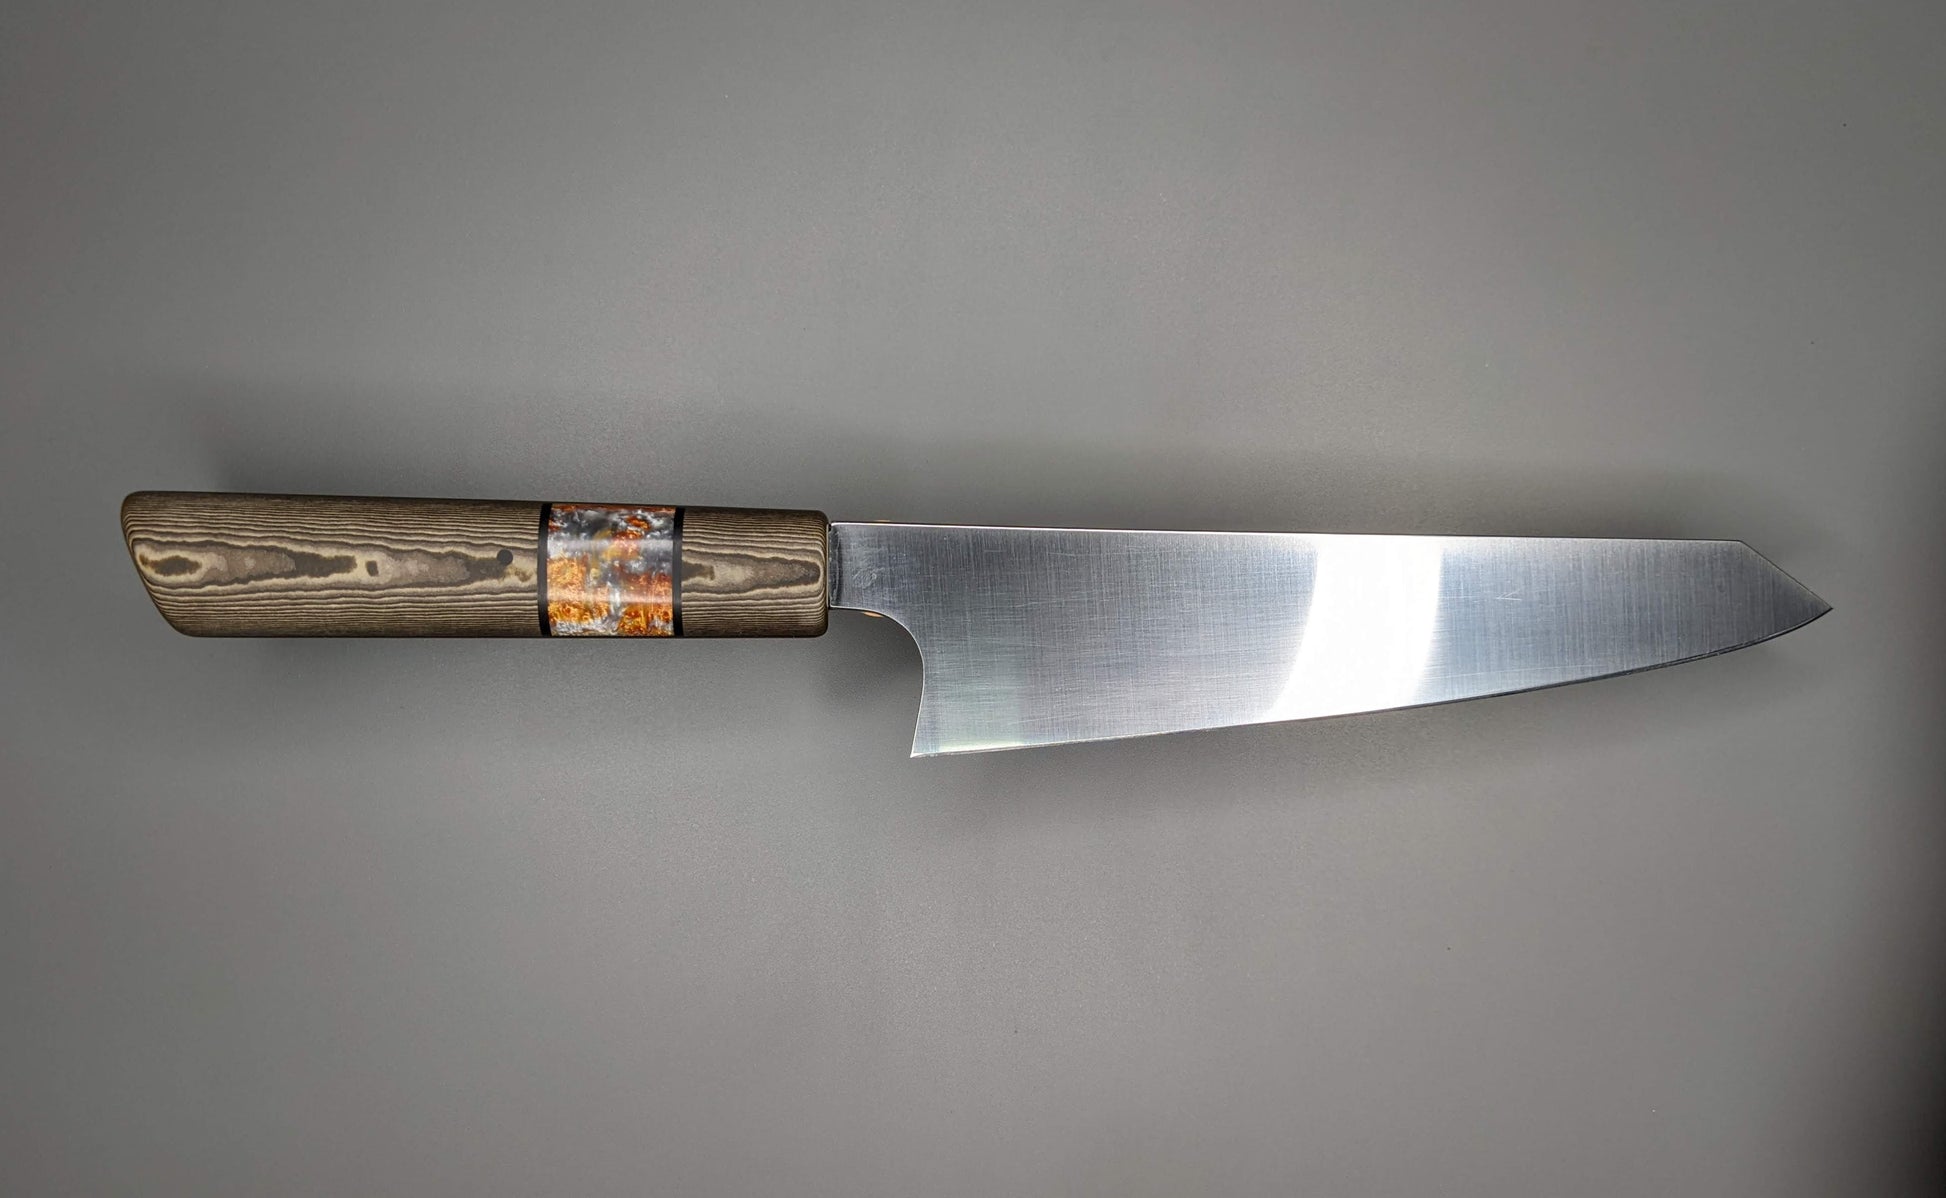 Japanese kitchen knife on gray background with brown handle